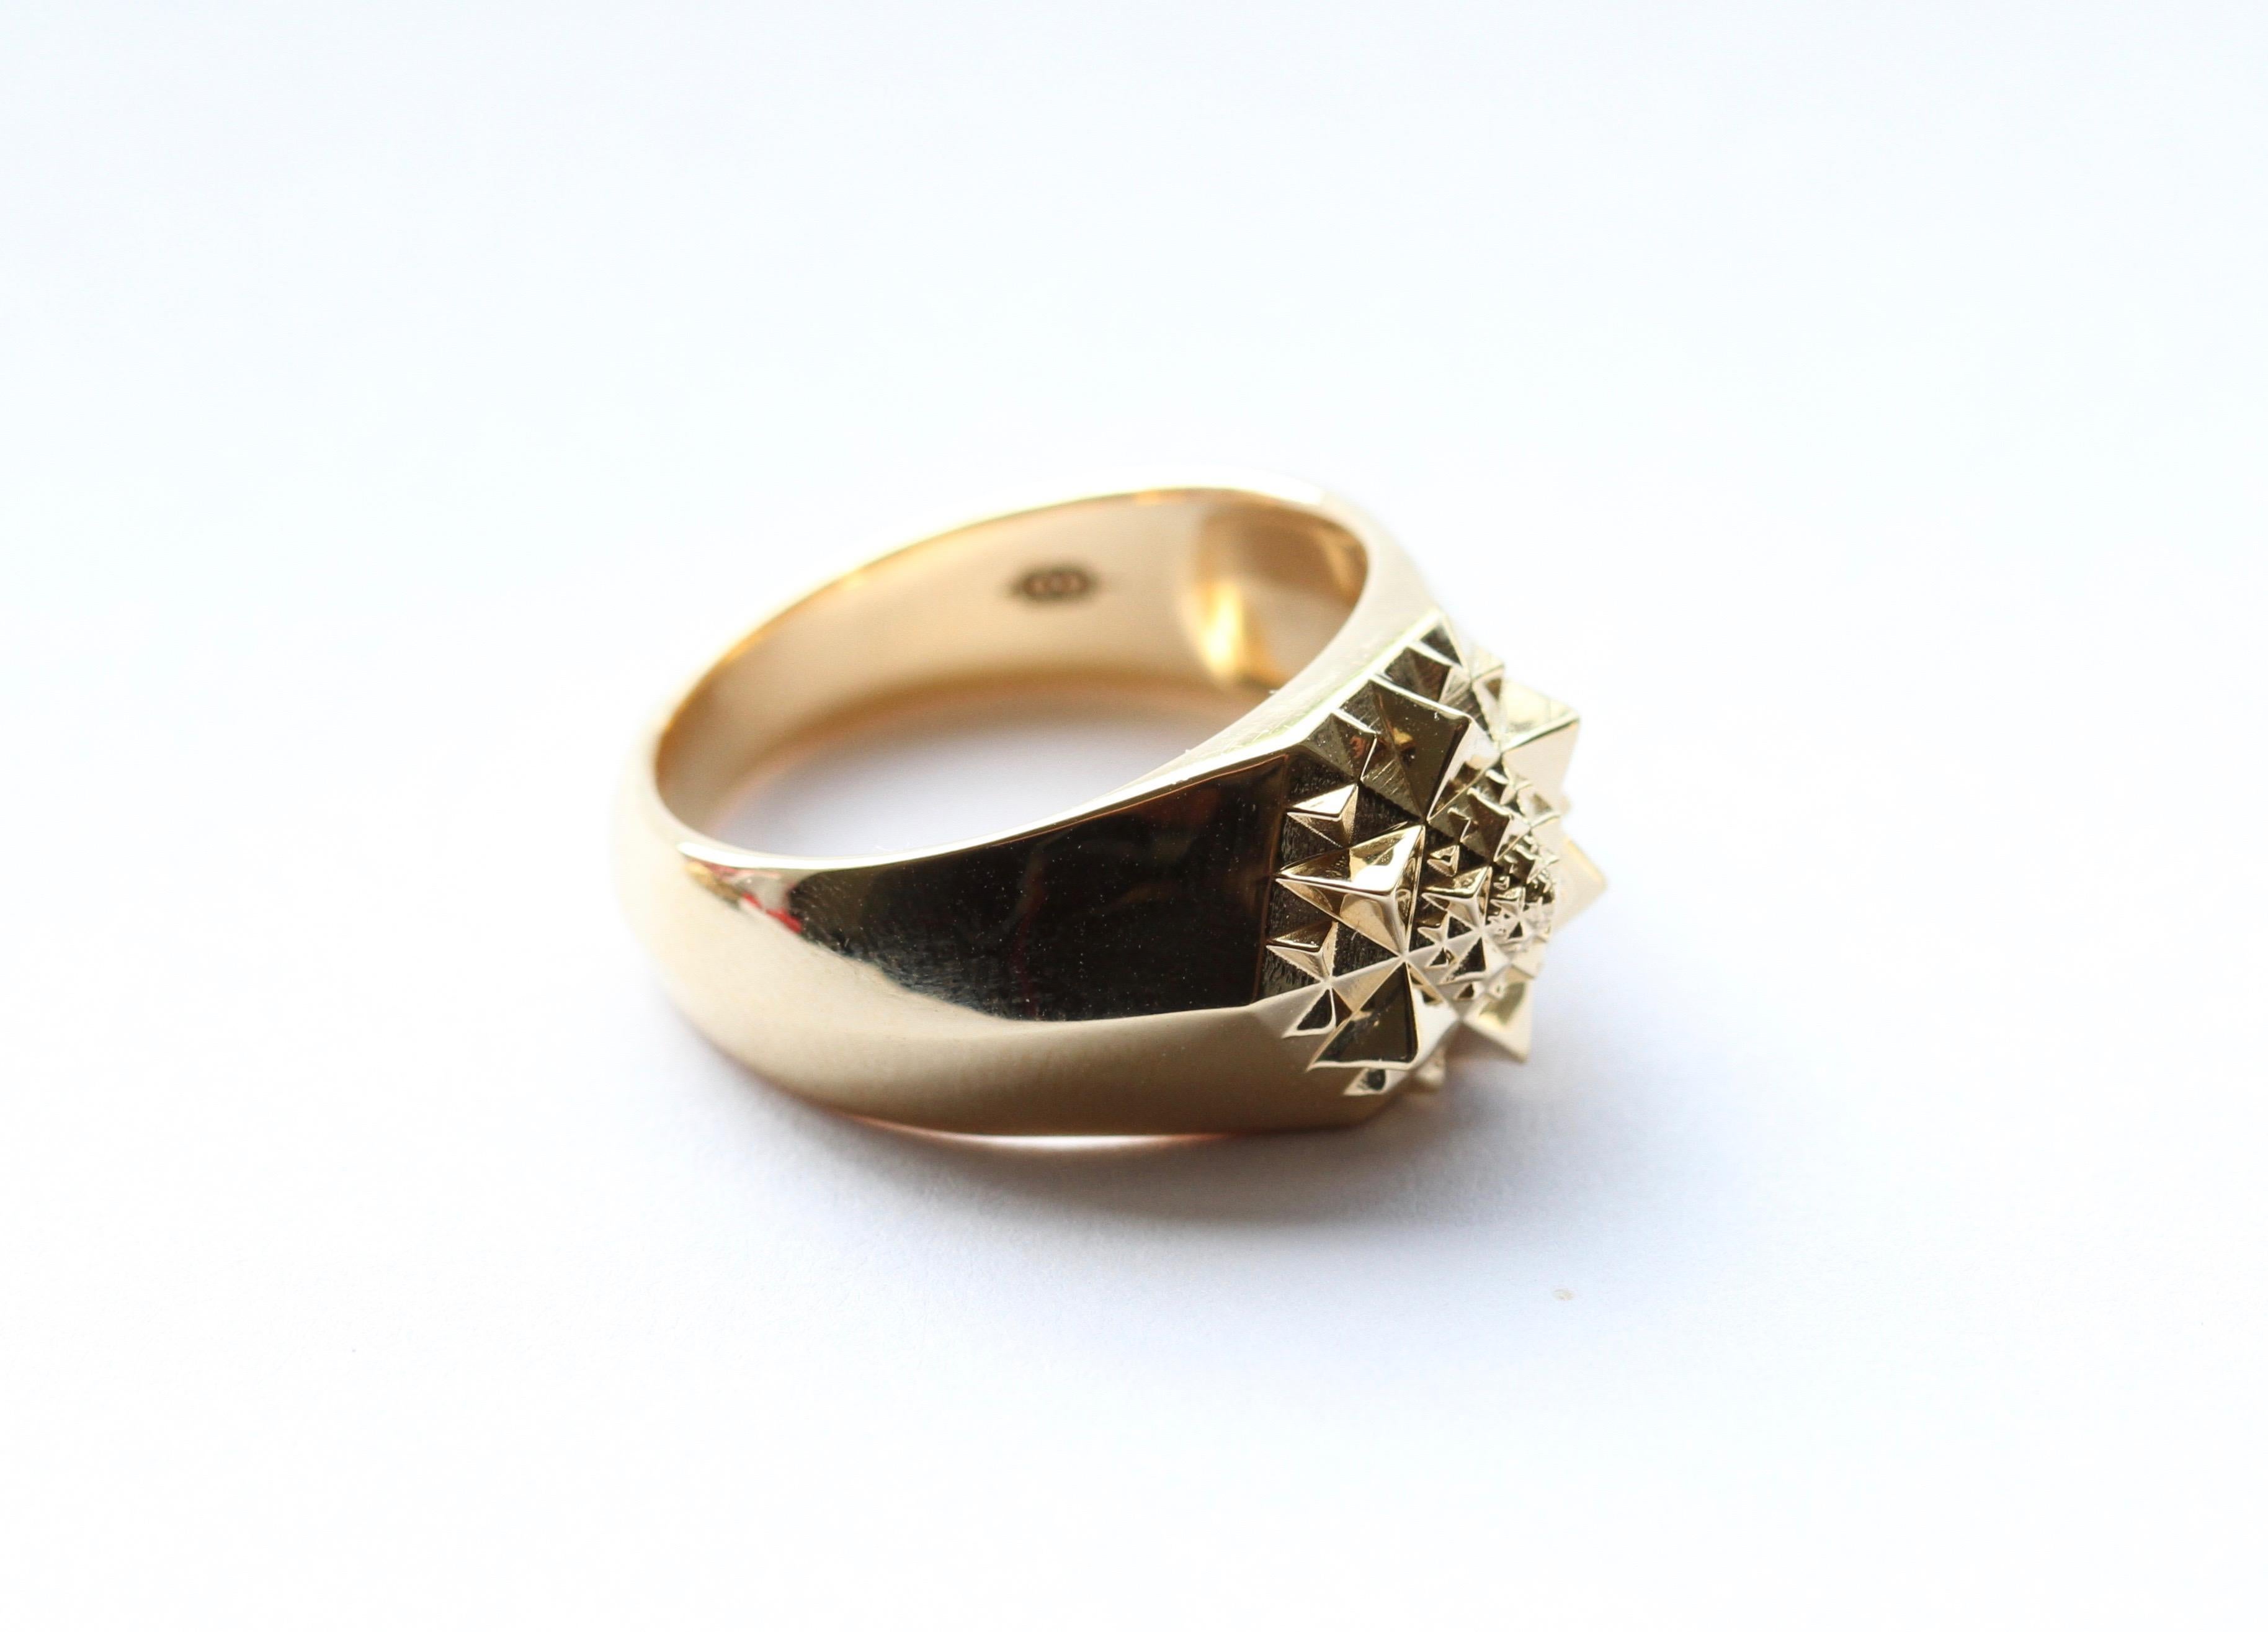 Unisex 18 Karat Gold Sacred Signet Ring by John Brevard In New Condition For Sale In Coral Gables, FL